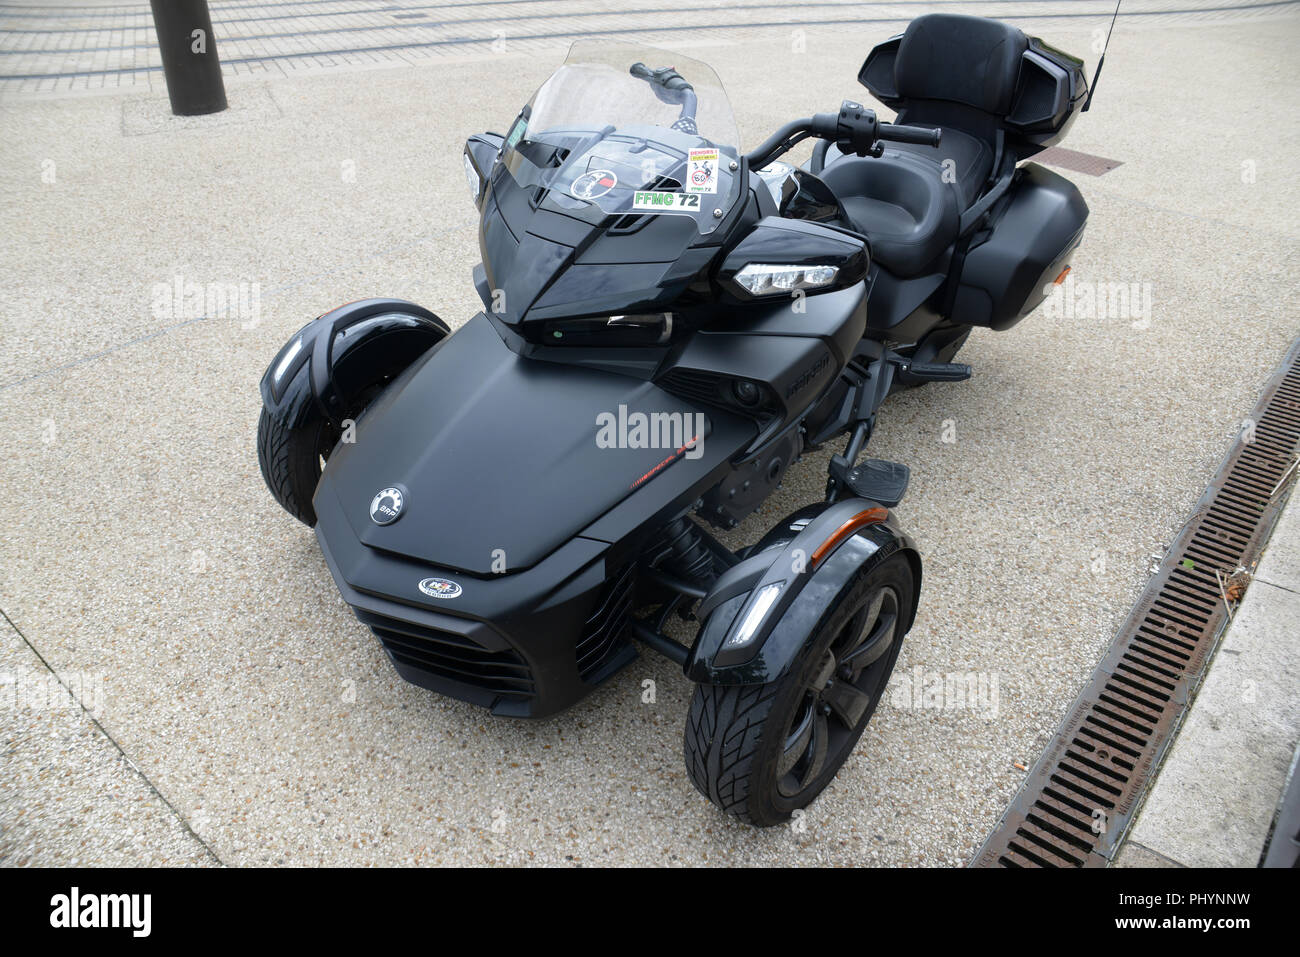 Full on view of a Can-Am's Spyder F3 Limited, a Delta trikes motorcycle  with two front wheels and one drive wheel on the back Stock Photo - Alamy